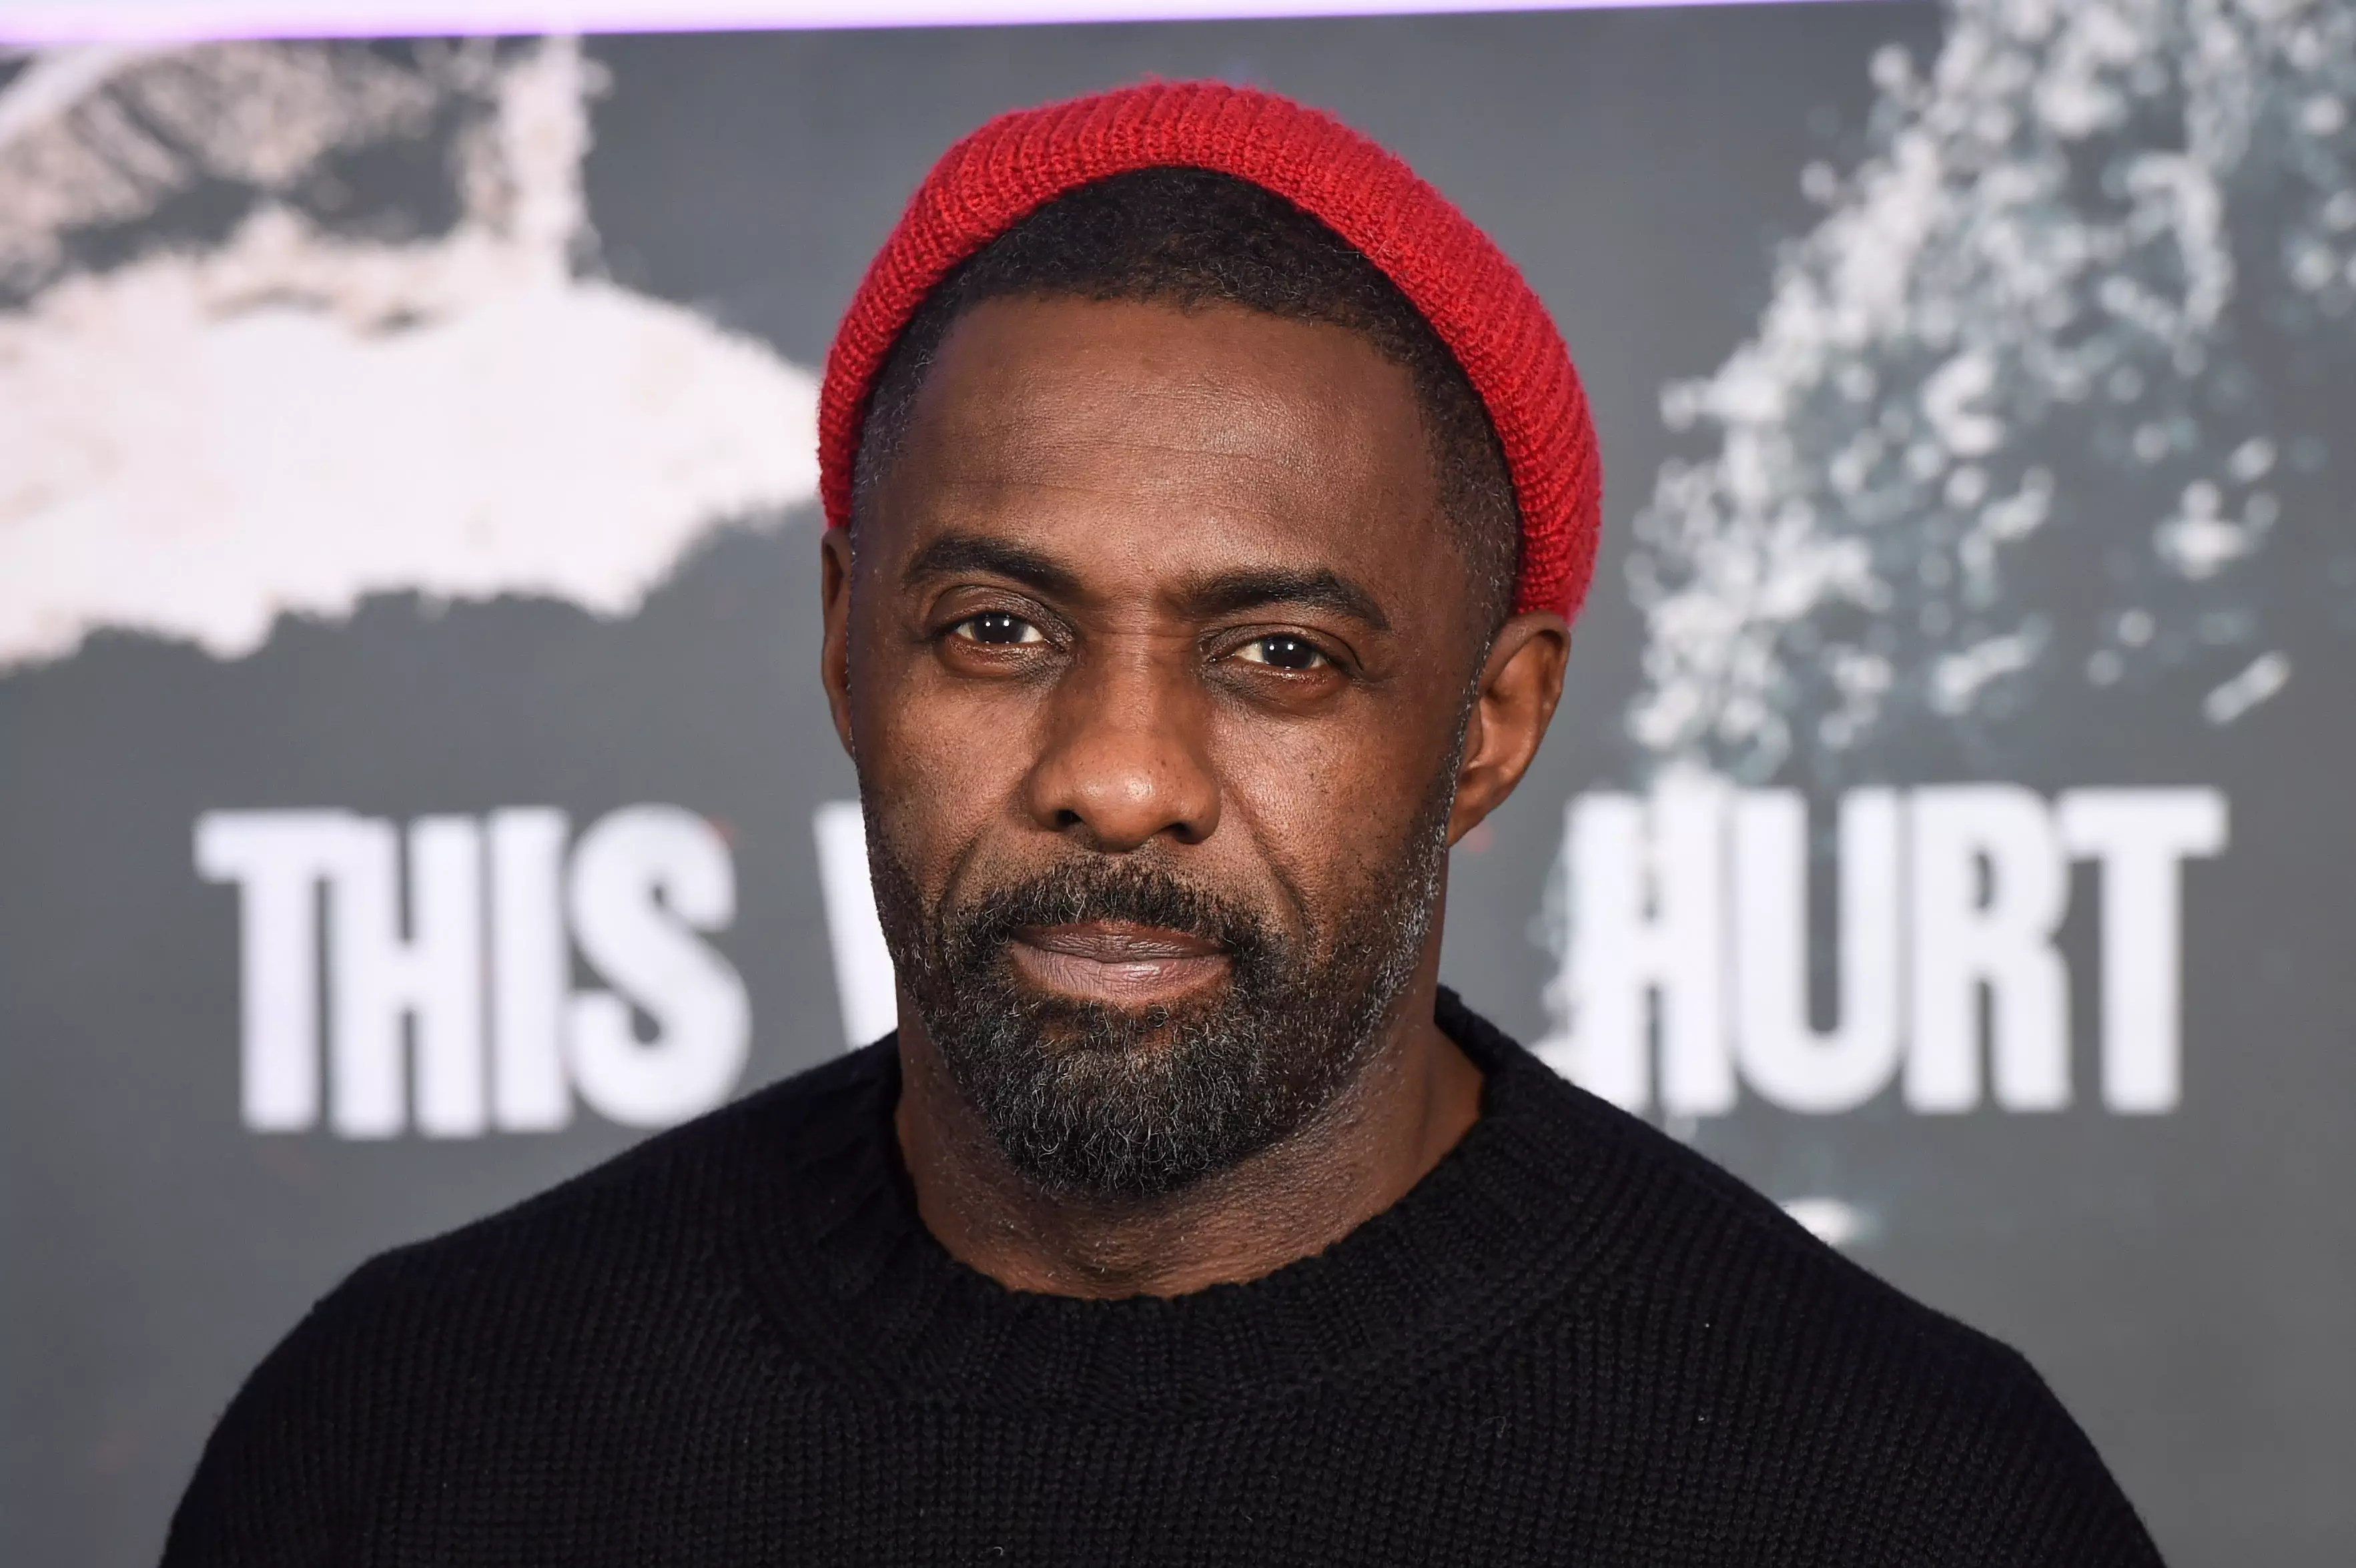 Idris Elba has confirmed a Luther movie is definitely happening.